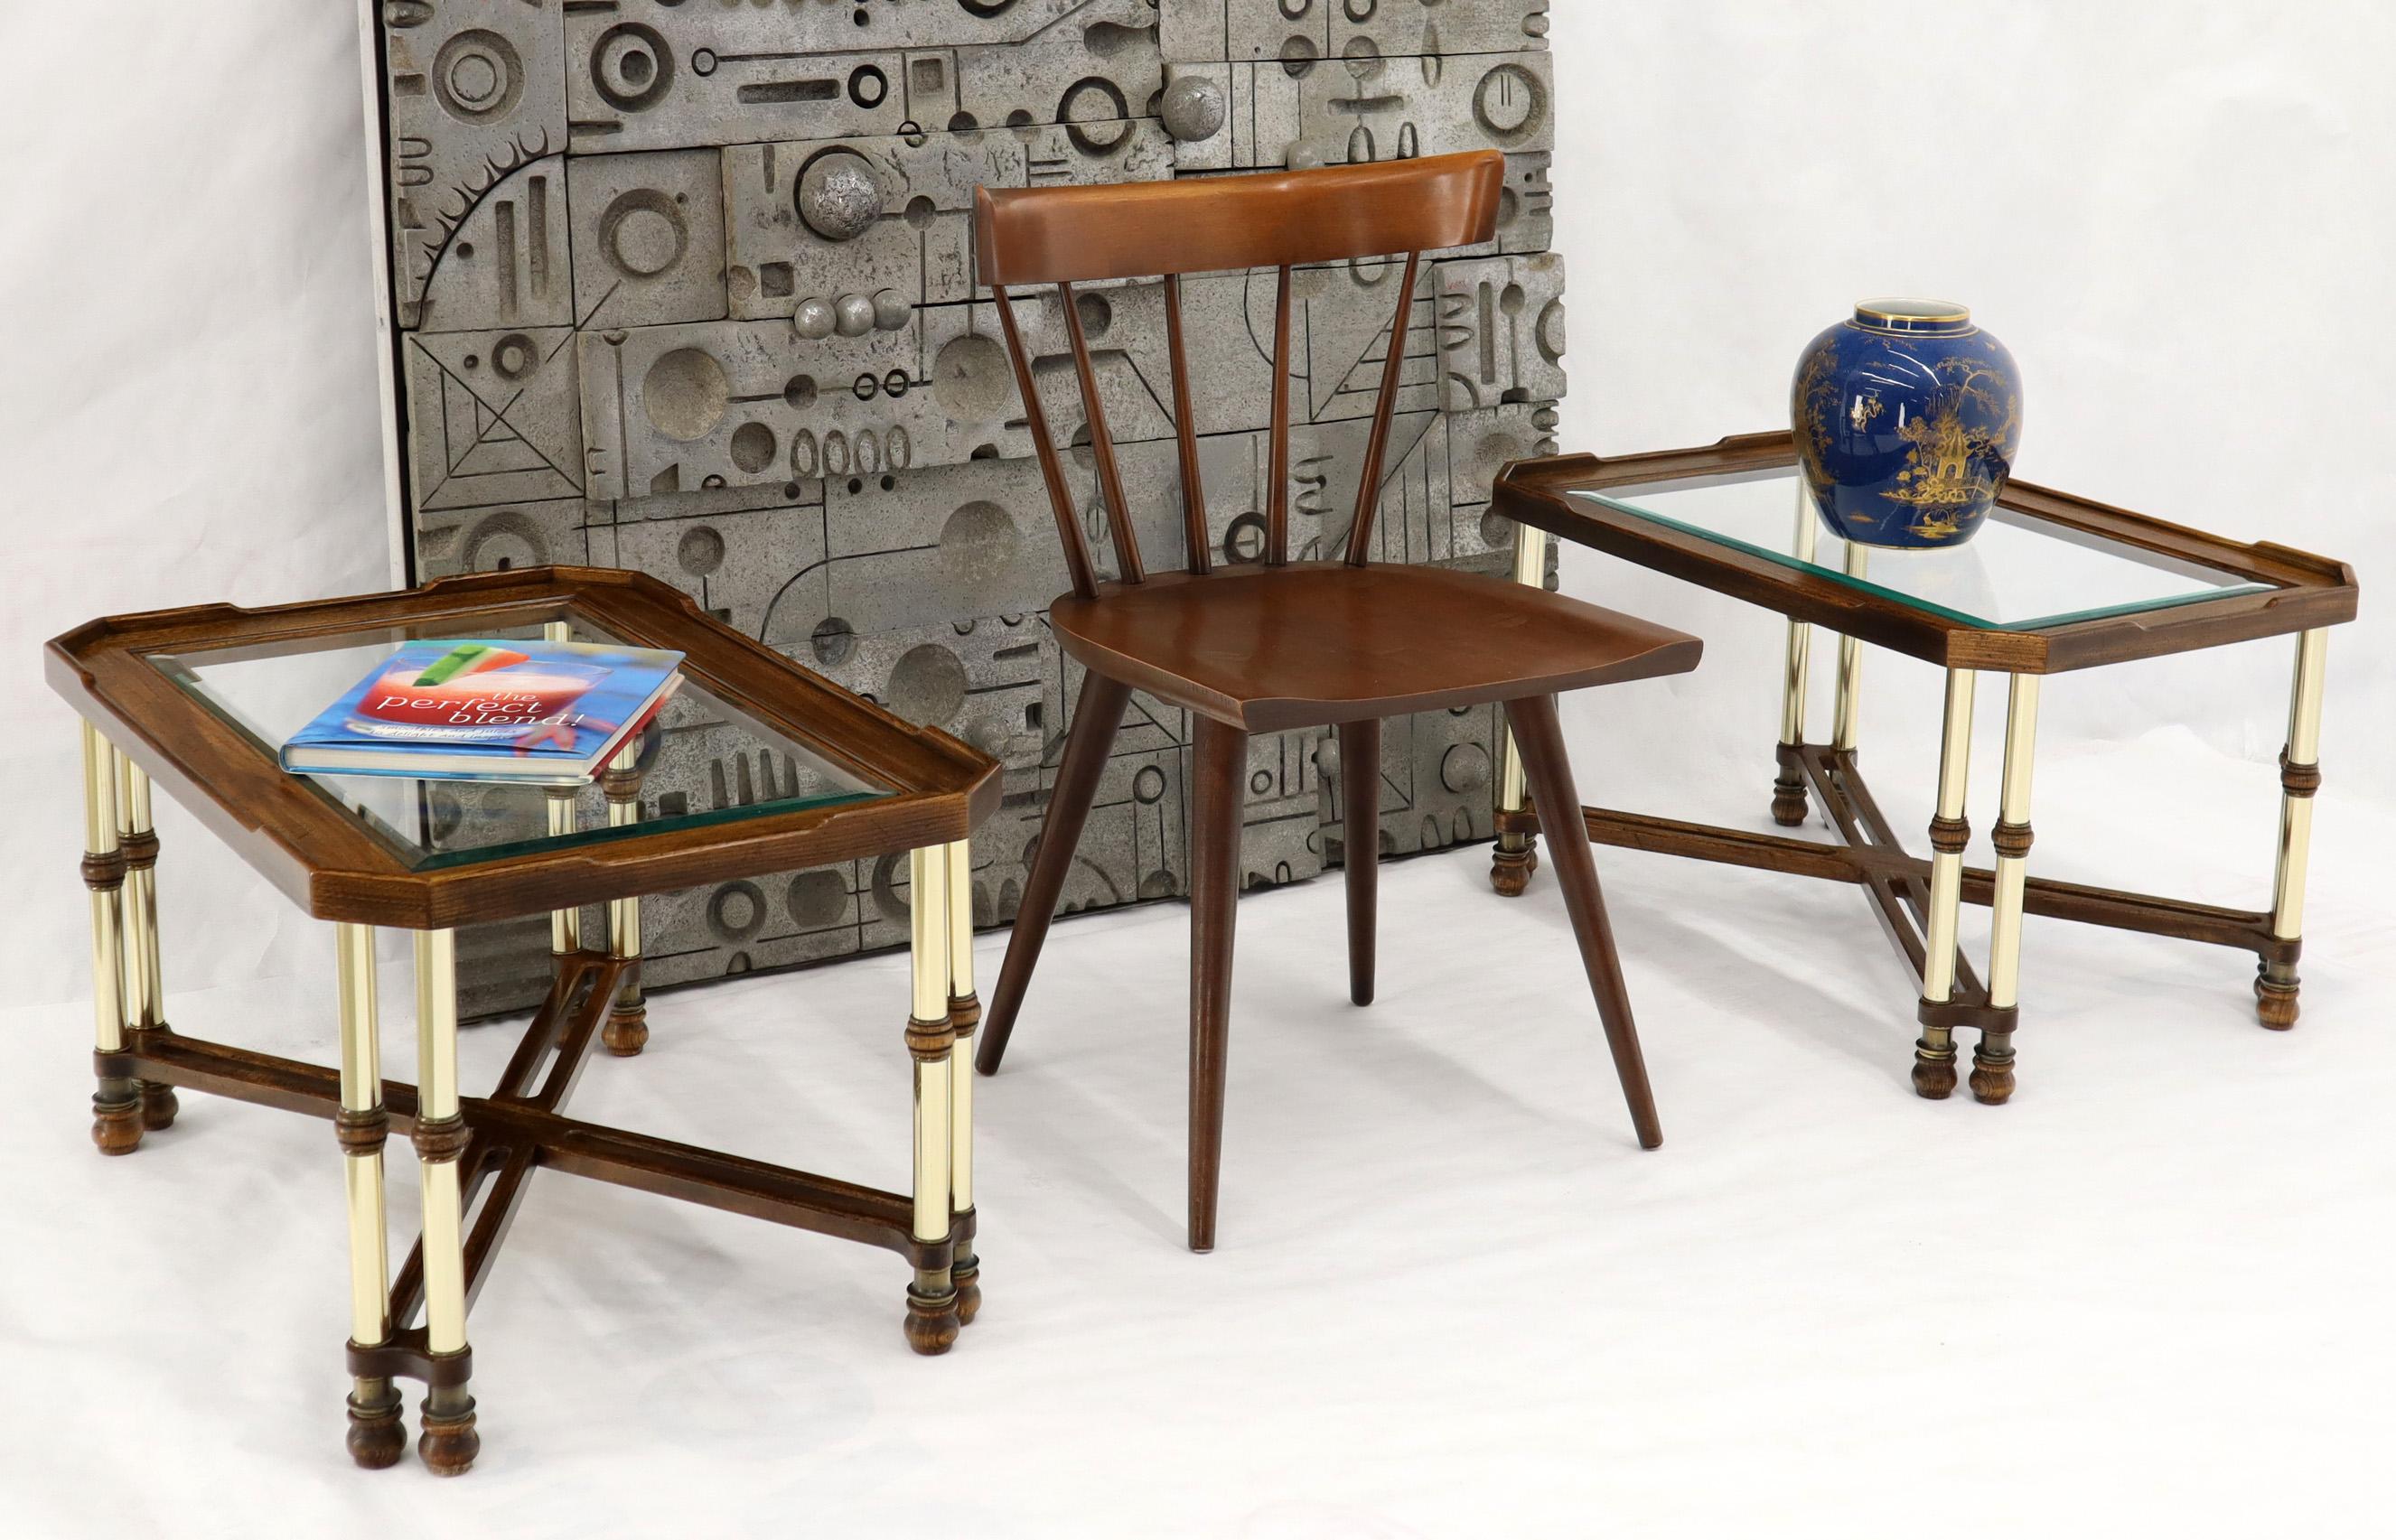 Pair of Mid-Century Modern rectangle glass tops actual polished brass end tables by Knobb Creek. Mastercraft influence.